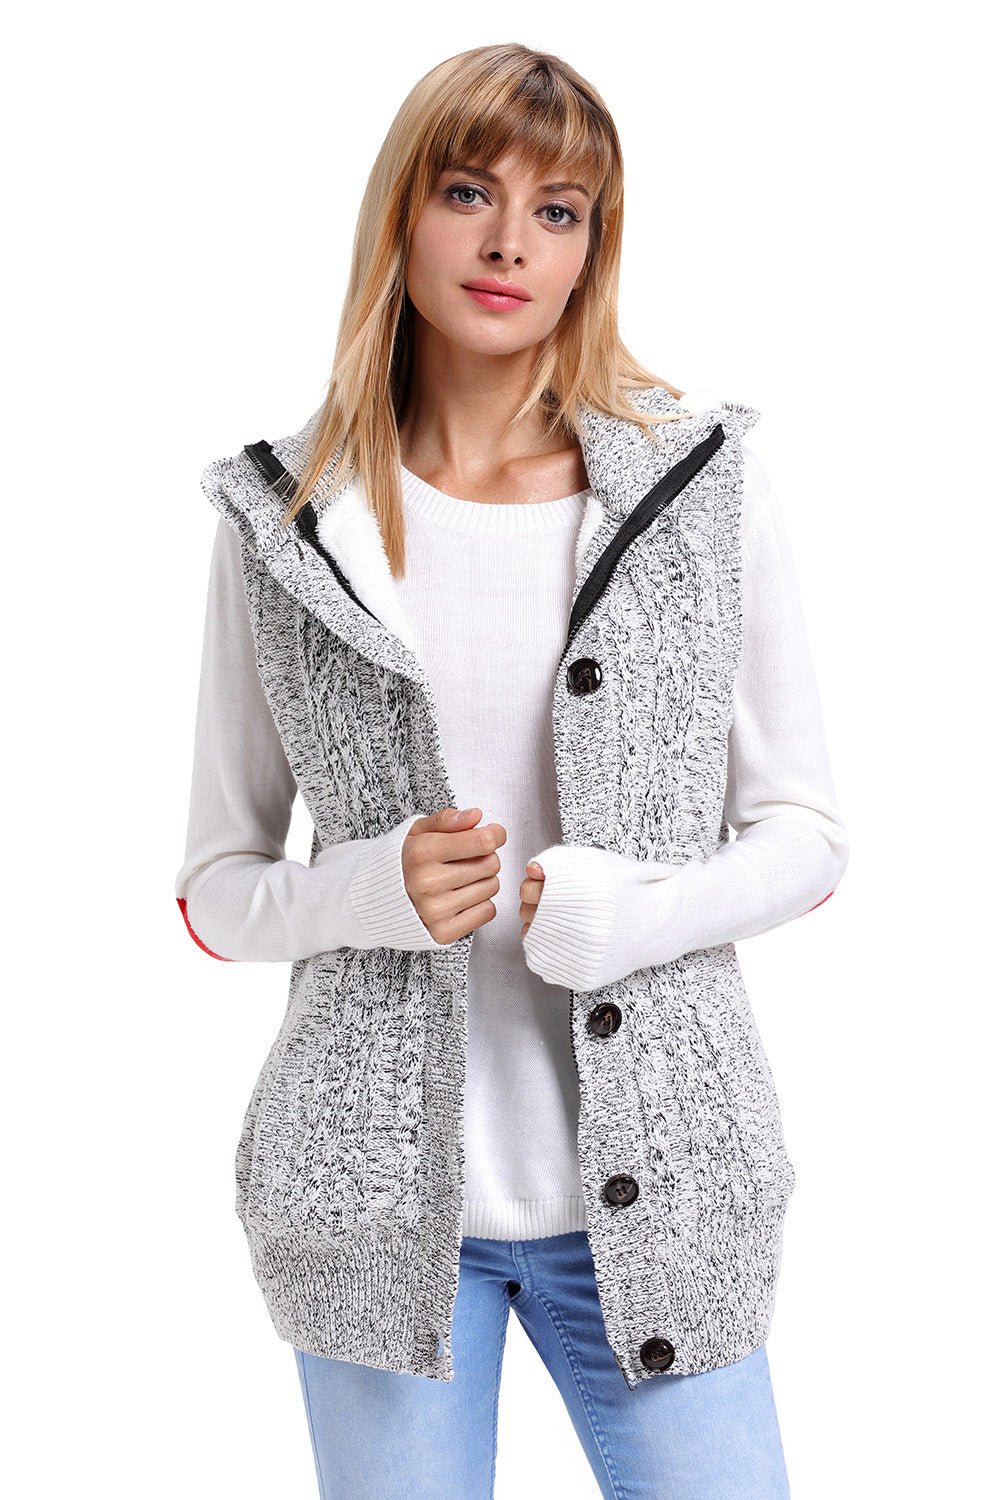 Heather Grey Cable Knit Hooded Sweater Vest